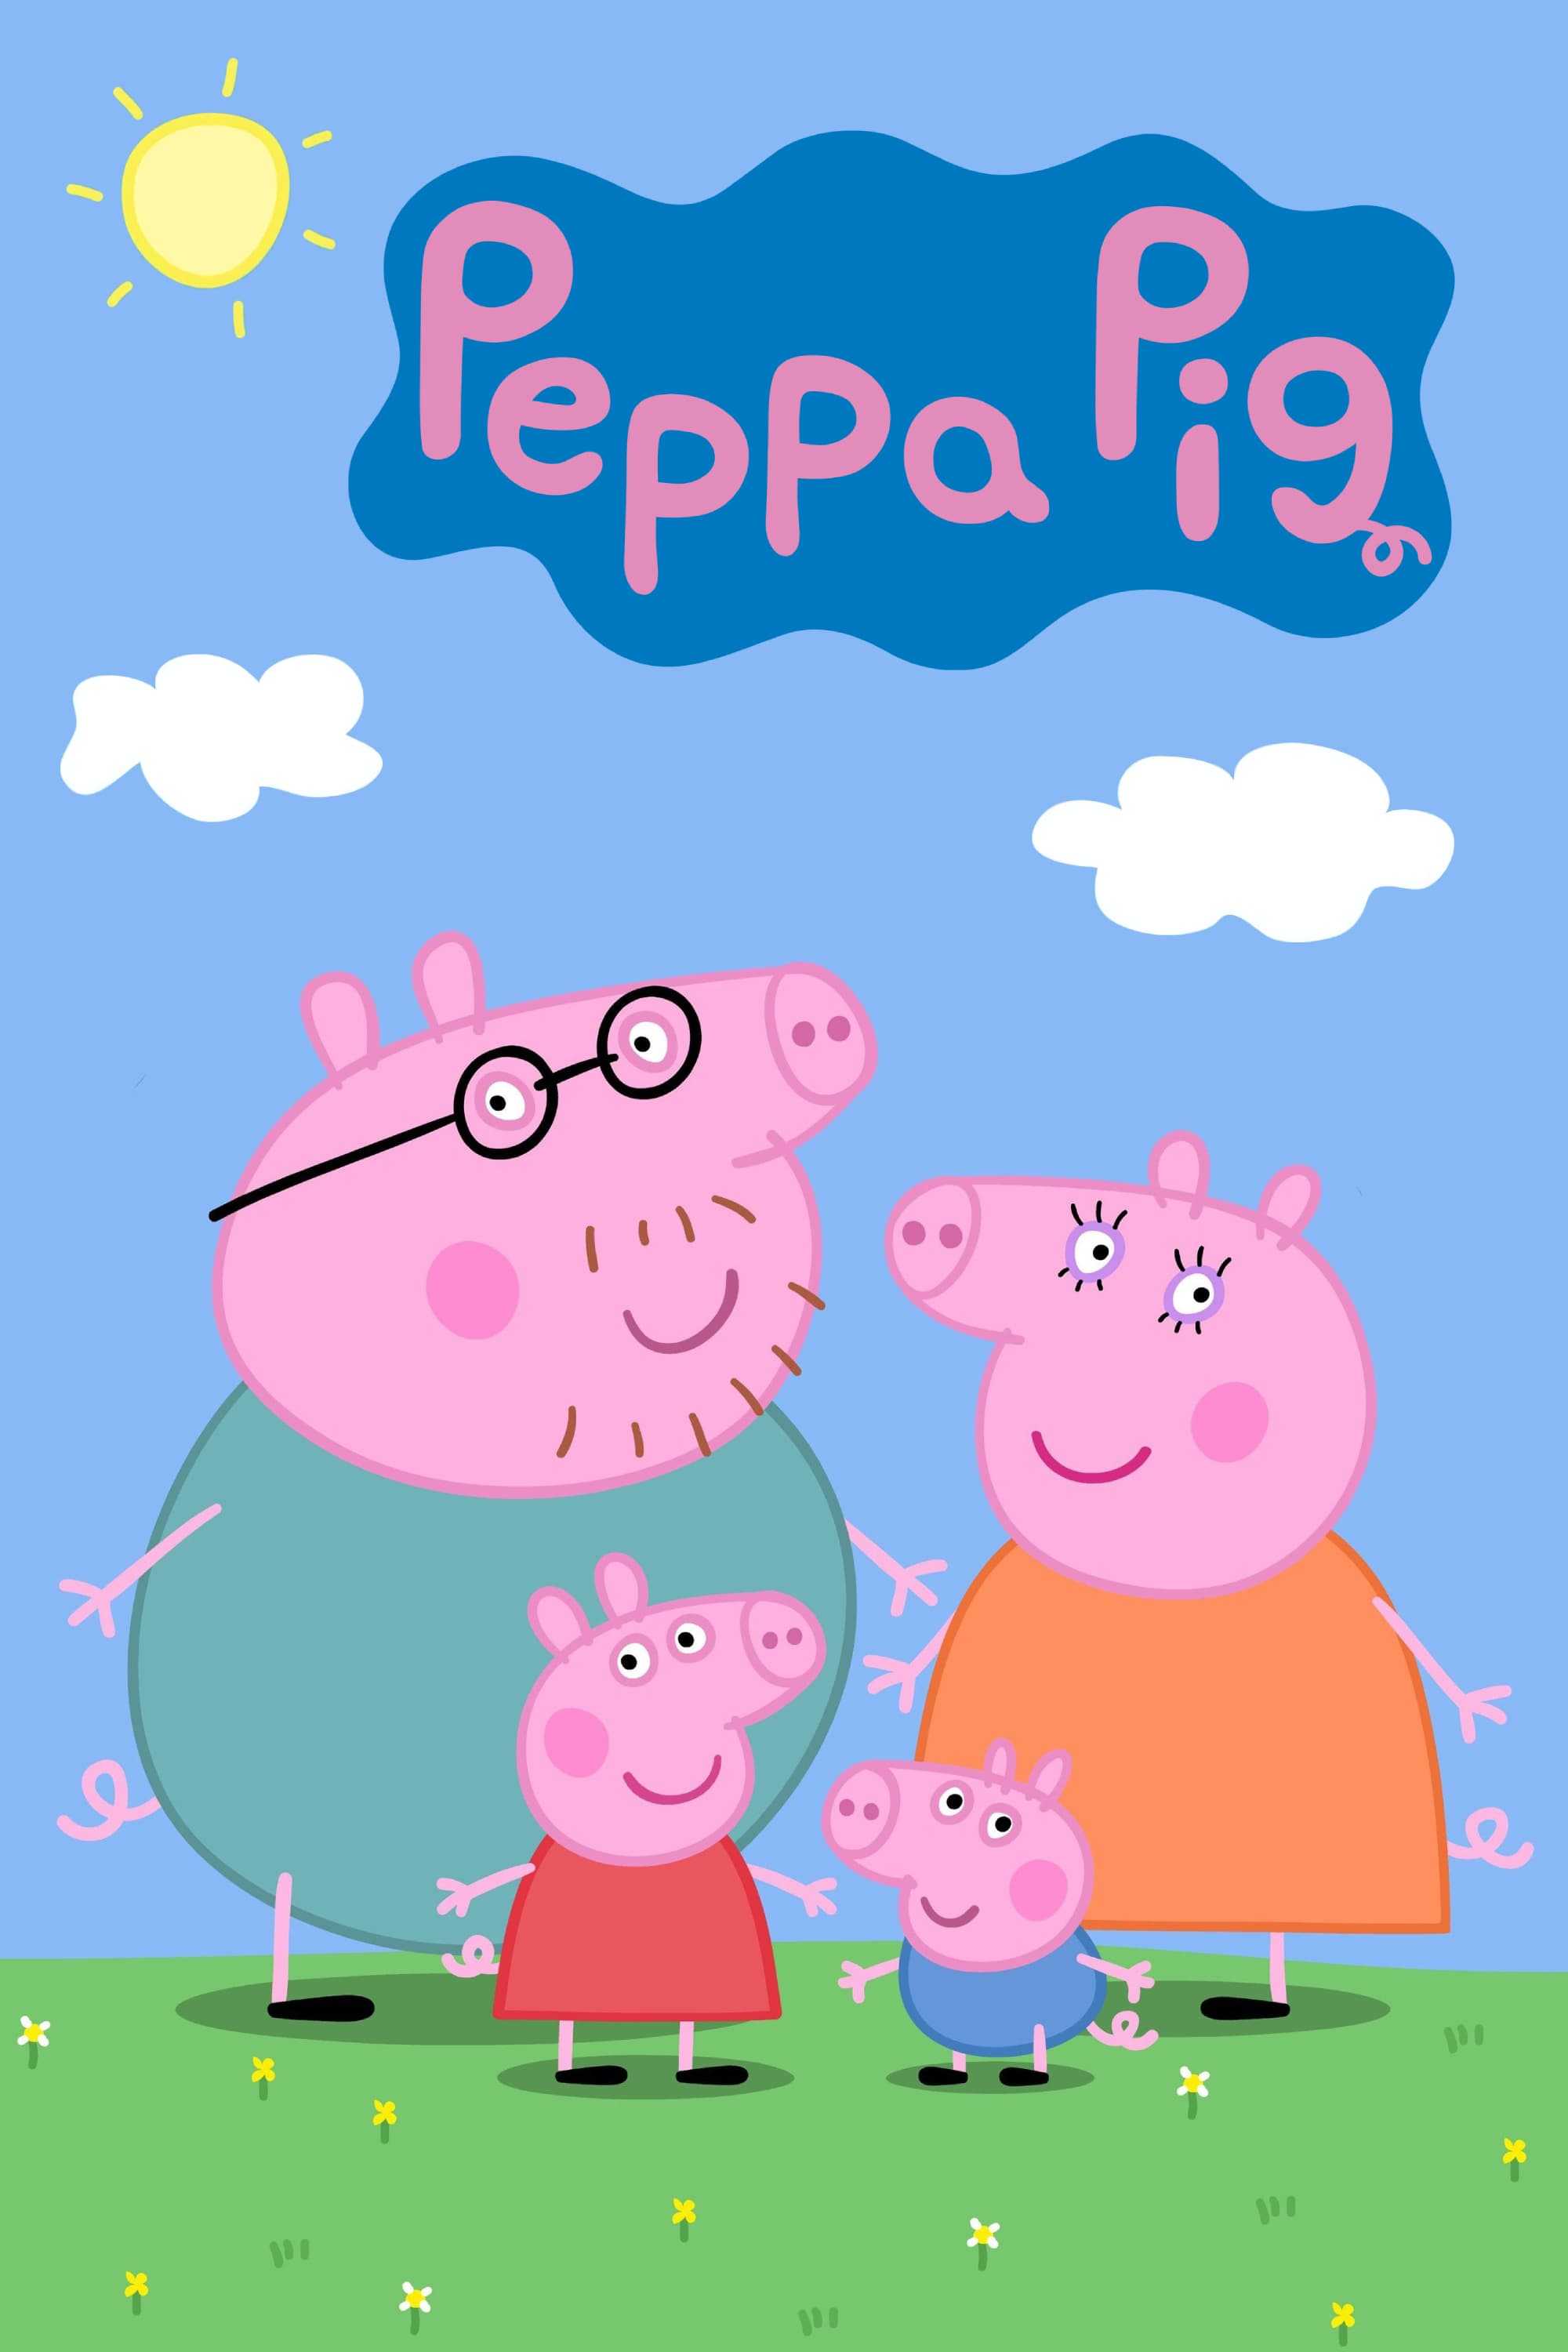 Peppa Pig Supreme KoLPaPer Awesome Free HD iPhone Wallpapers Free Download